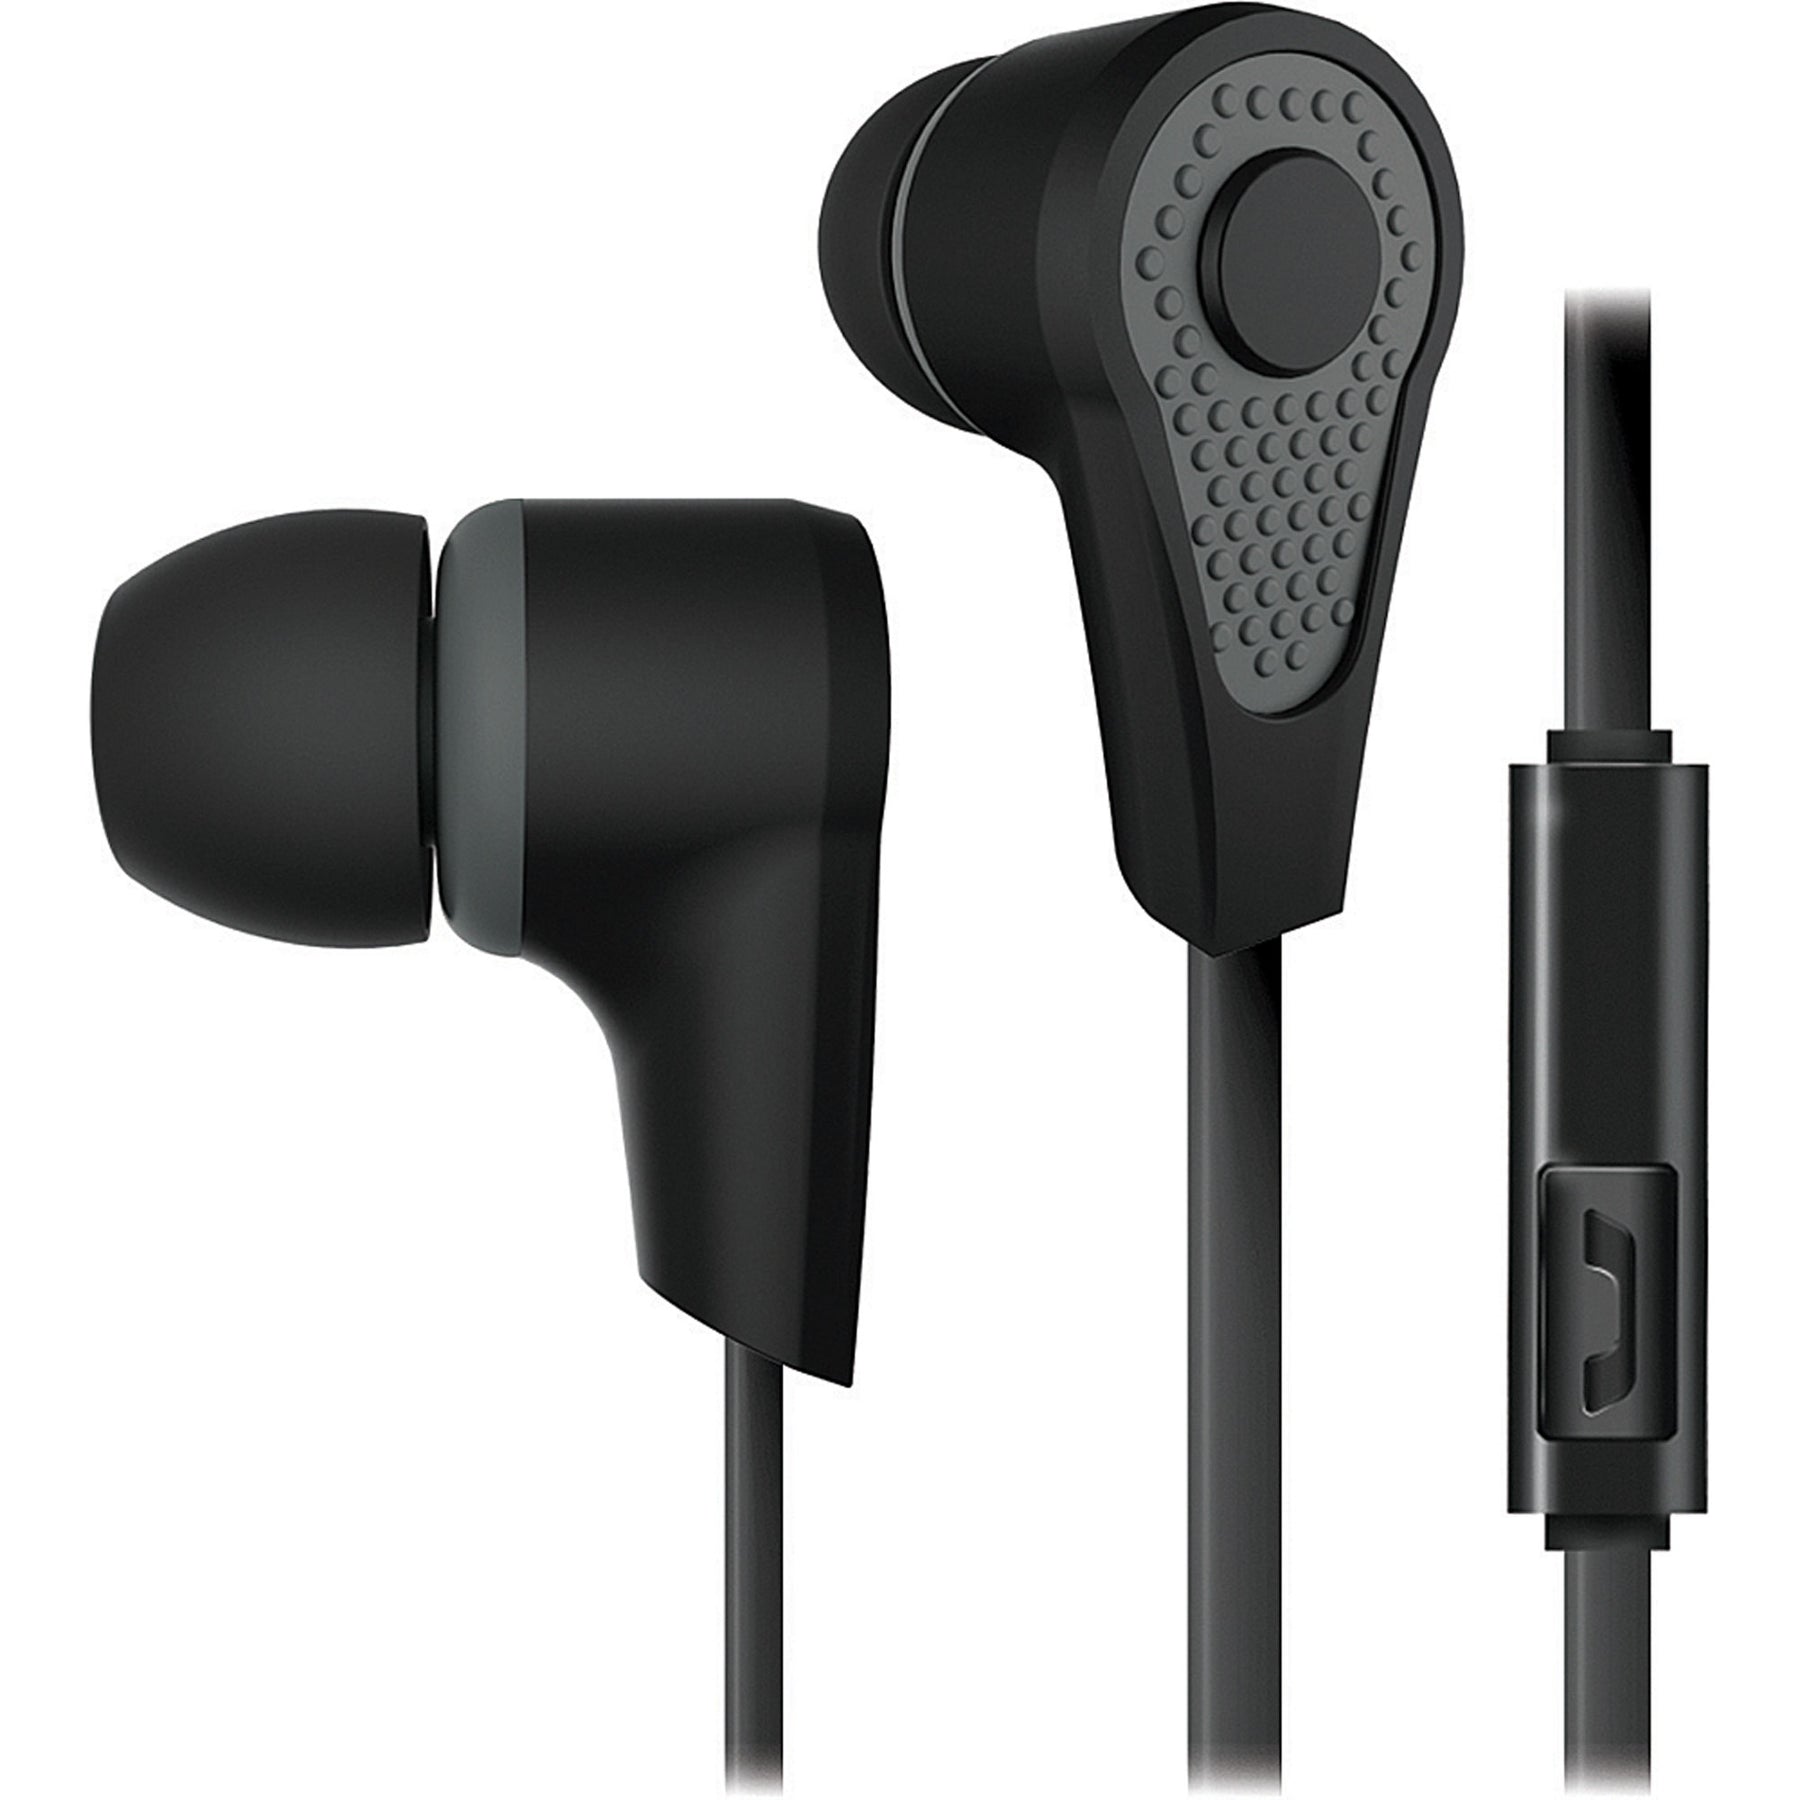 Coby CVE143BK Tangle-Free Stereo Earbuds Earphones with Built in Microphone, Black